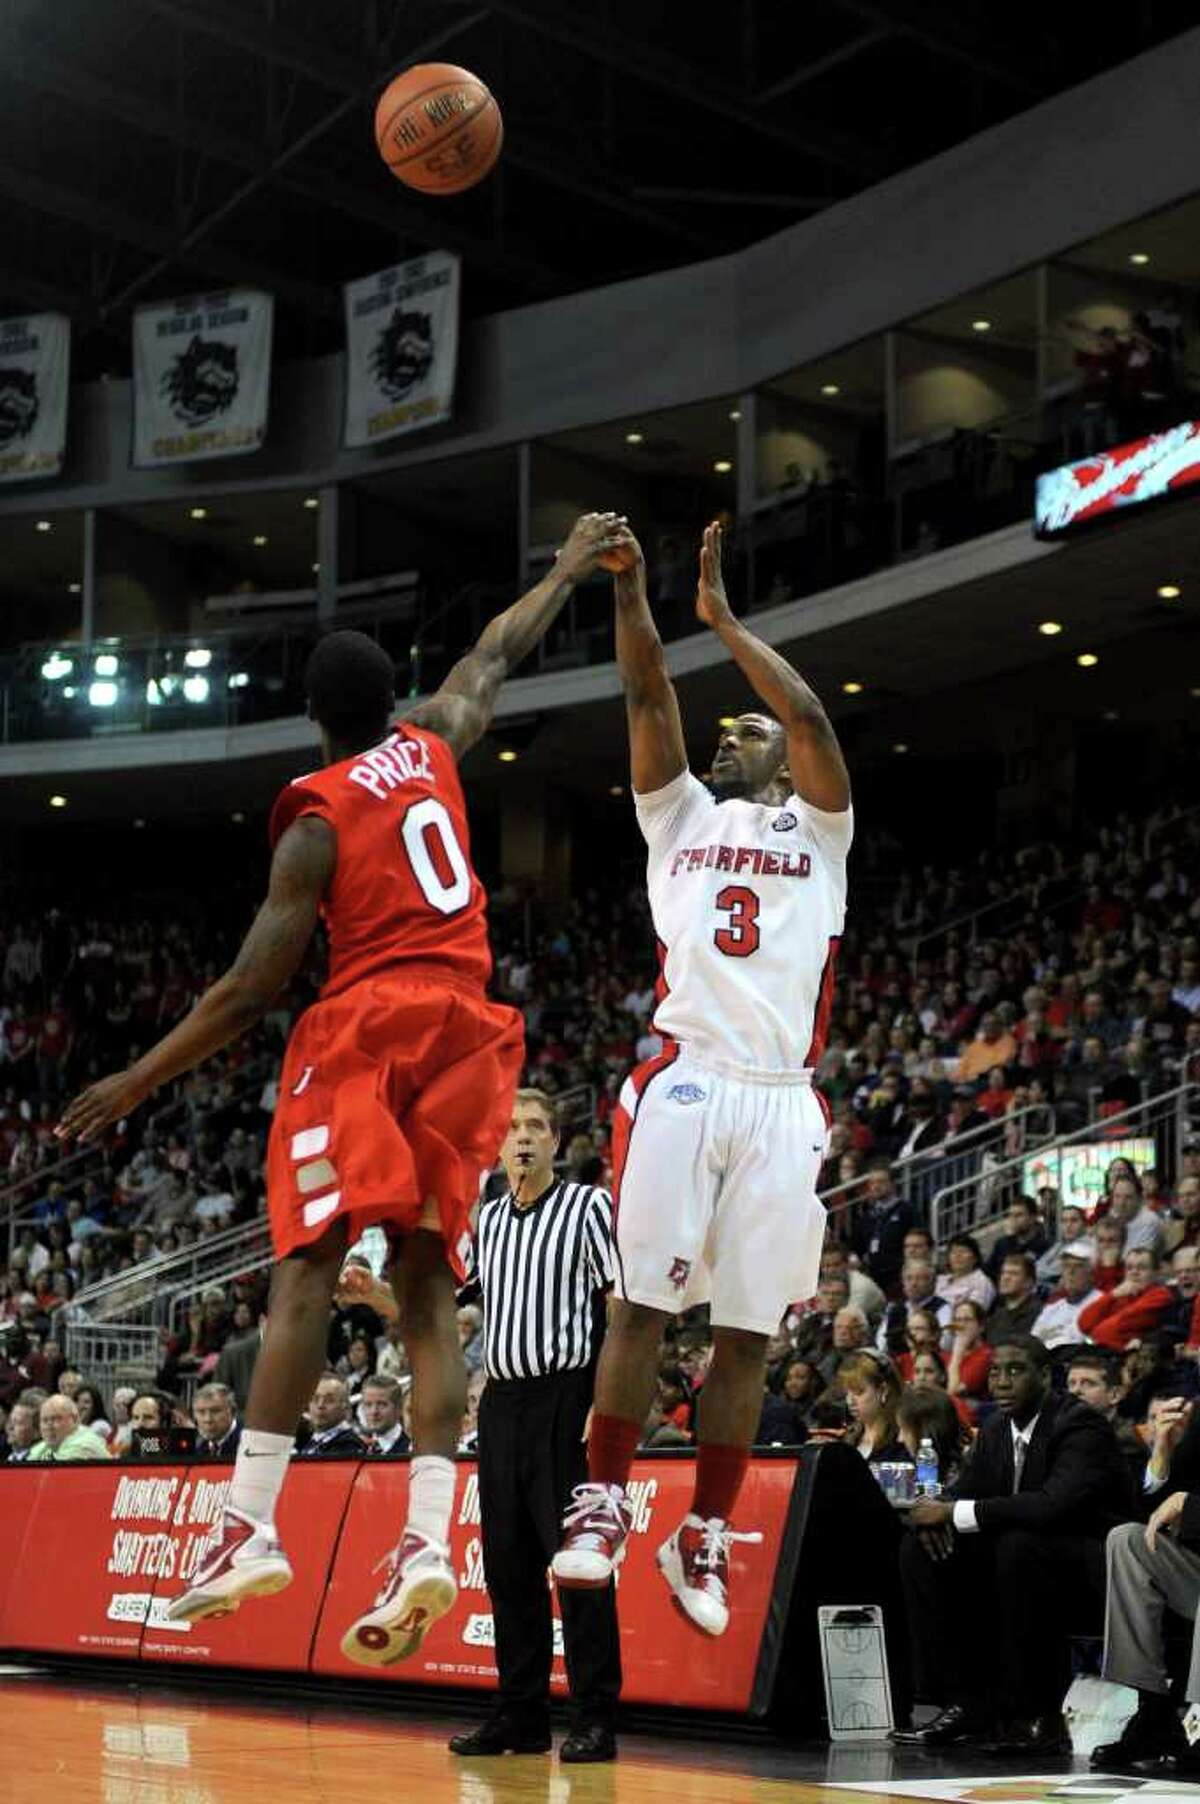 Fairfield University's Derek Needham takes a shot as Marist's Devin Price defends during Saturday's MAAC quarterfinal game at Webster Bank Arena at Harbor Yard on March 5, 2011.